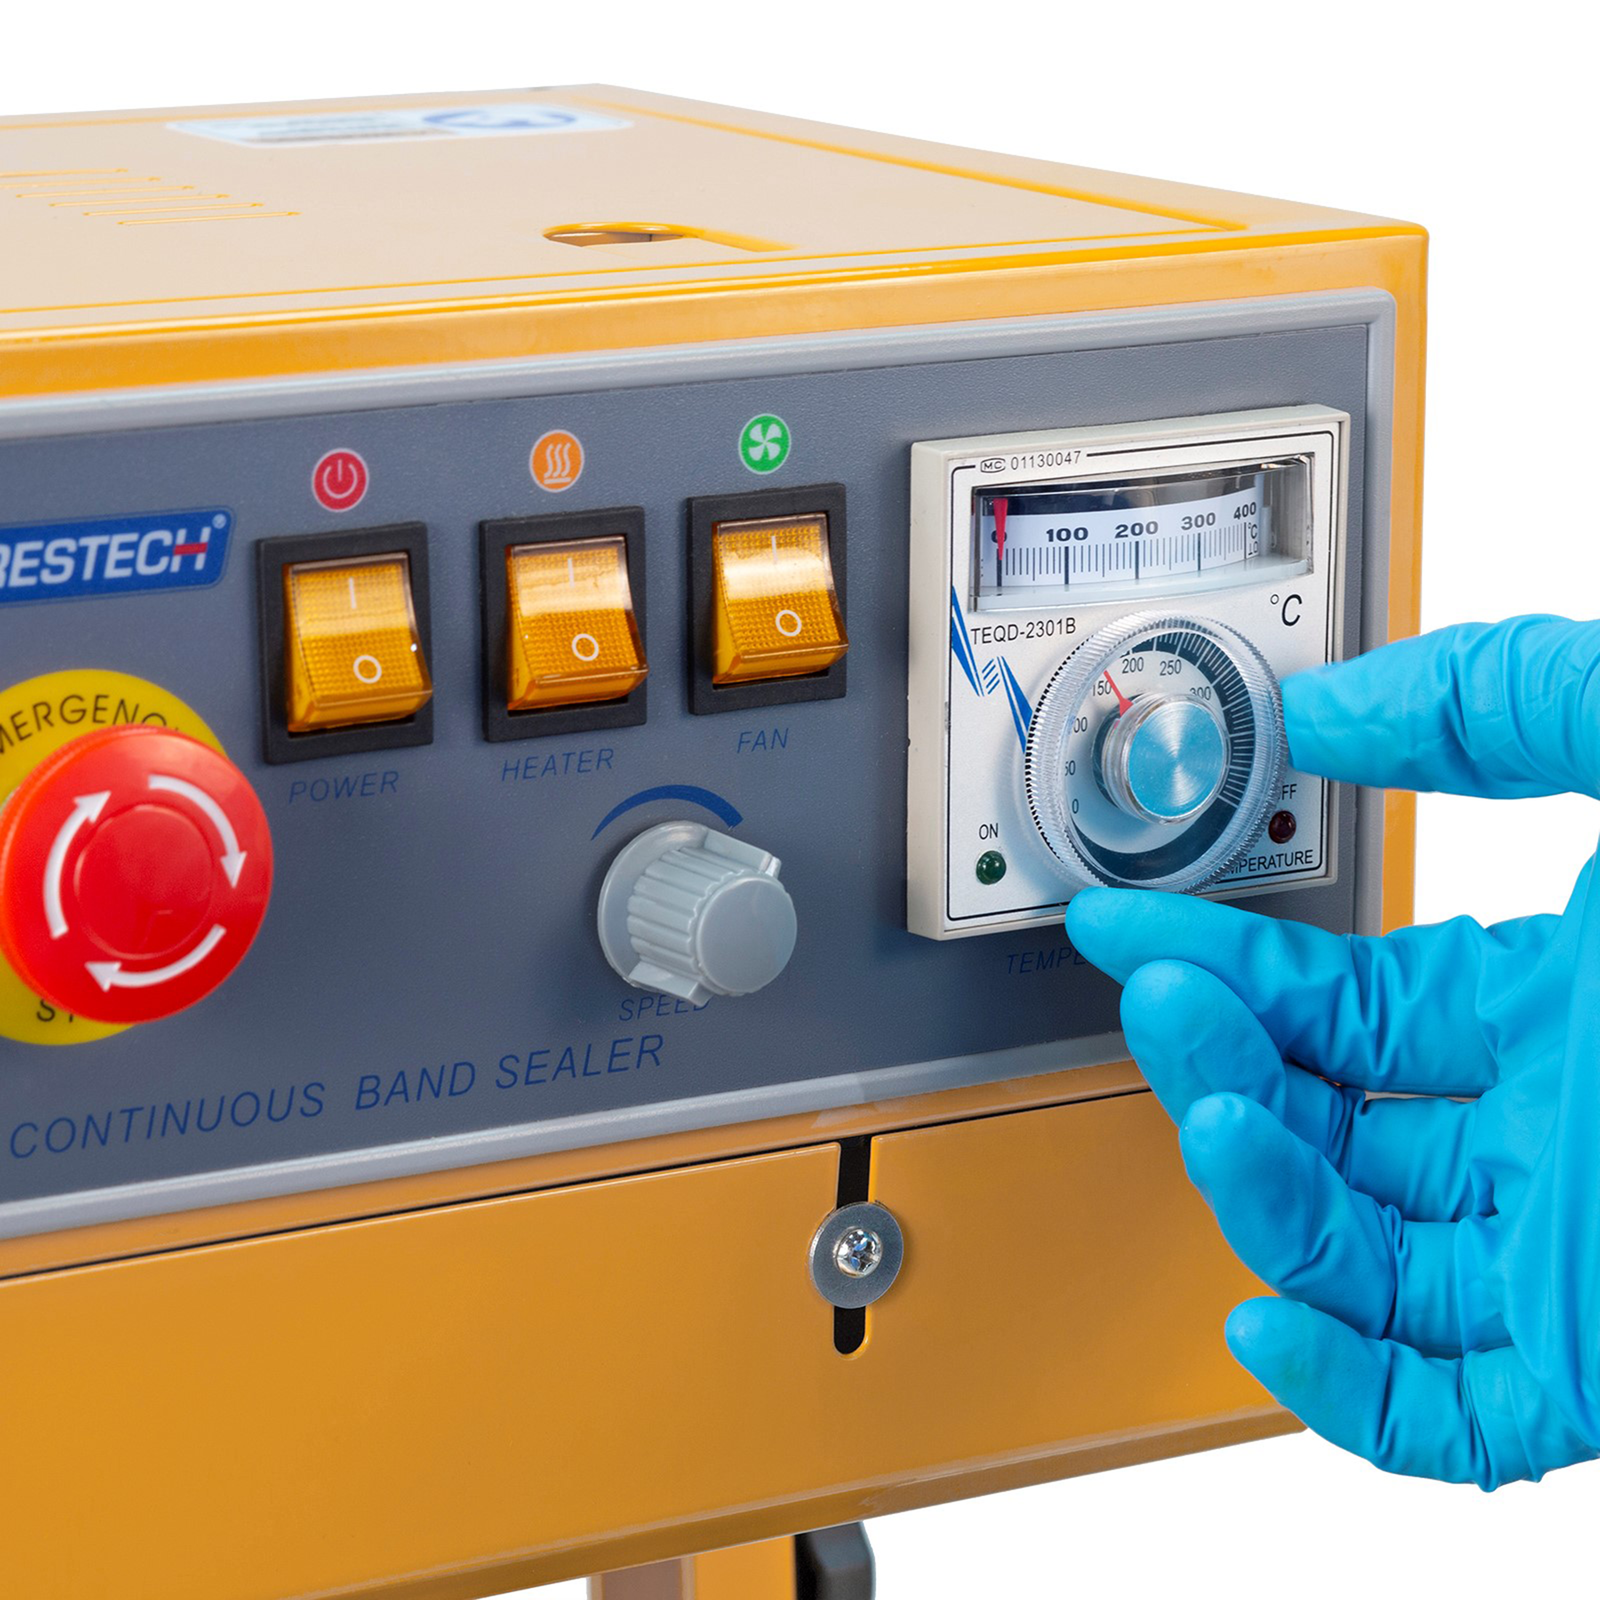 operator wearing blue gloves adjusting temperature on the analog dial on control panel of the Jorestech continuous band sealer 